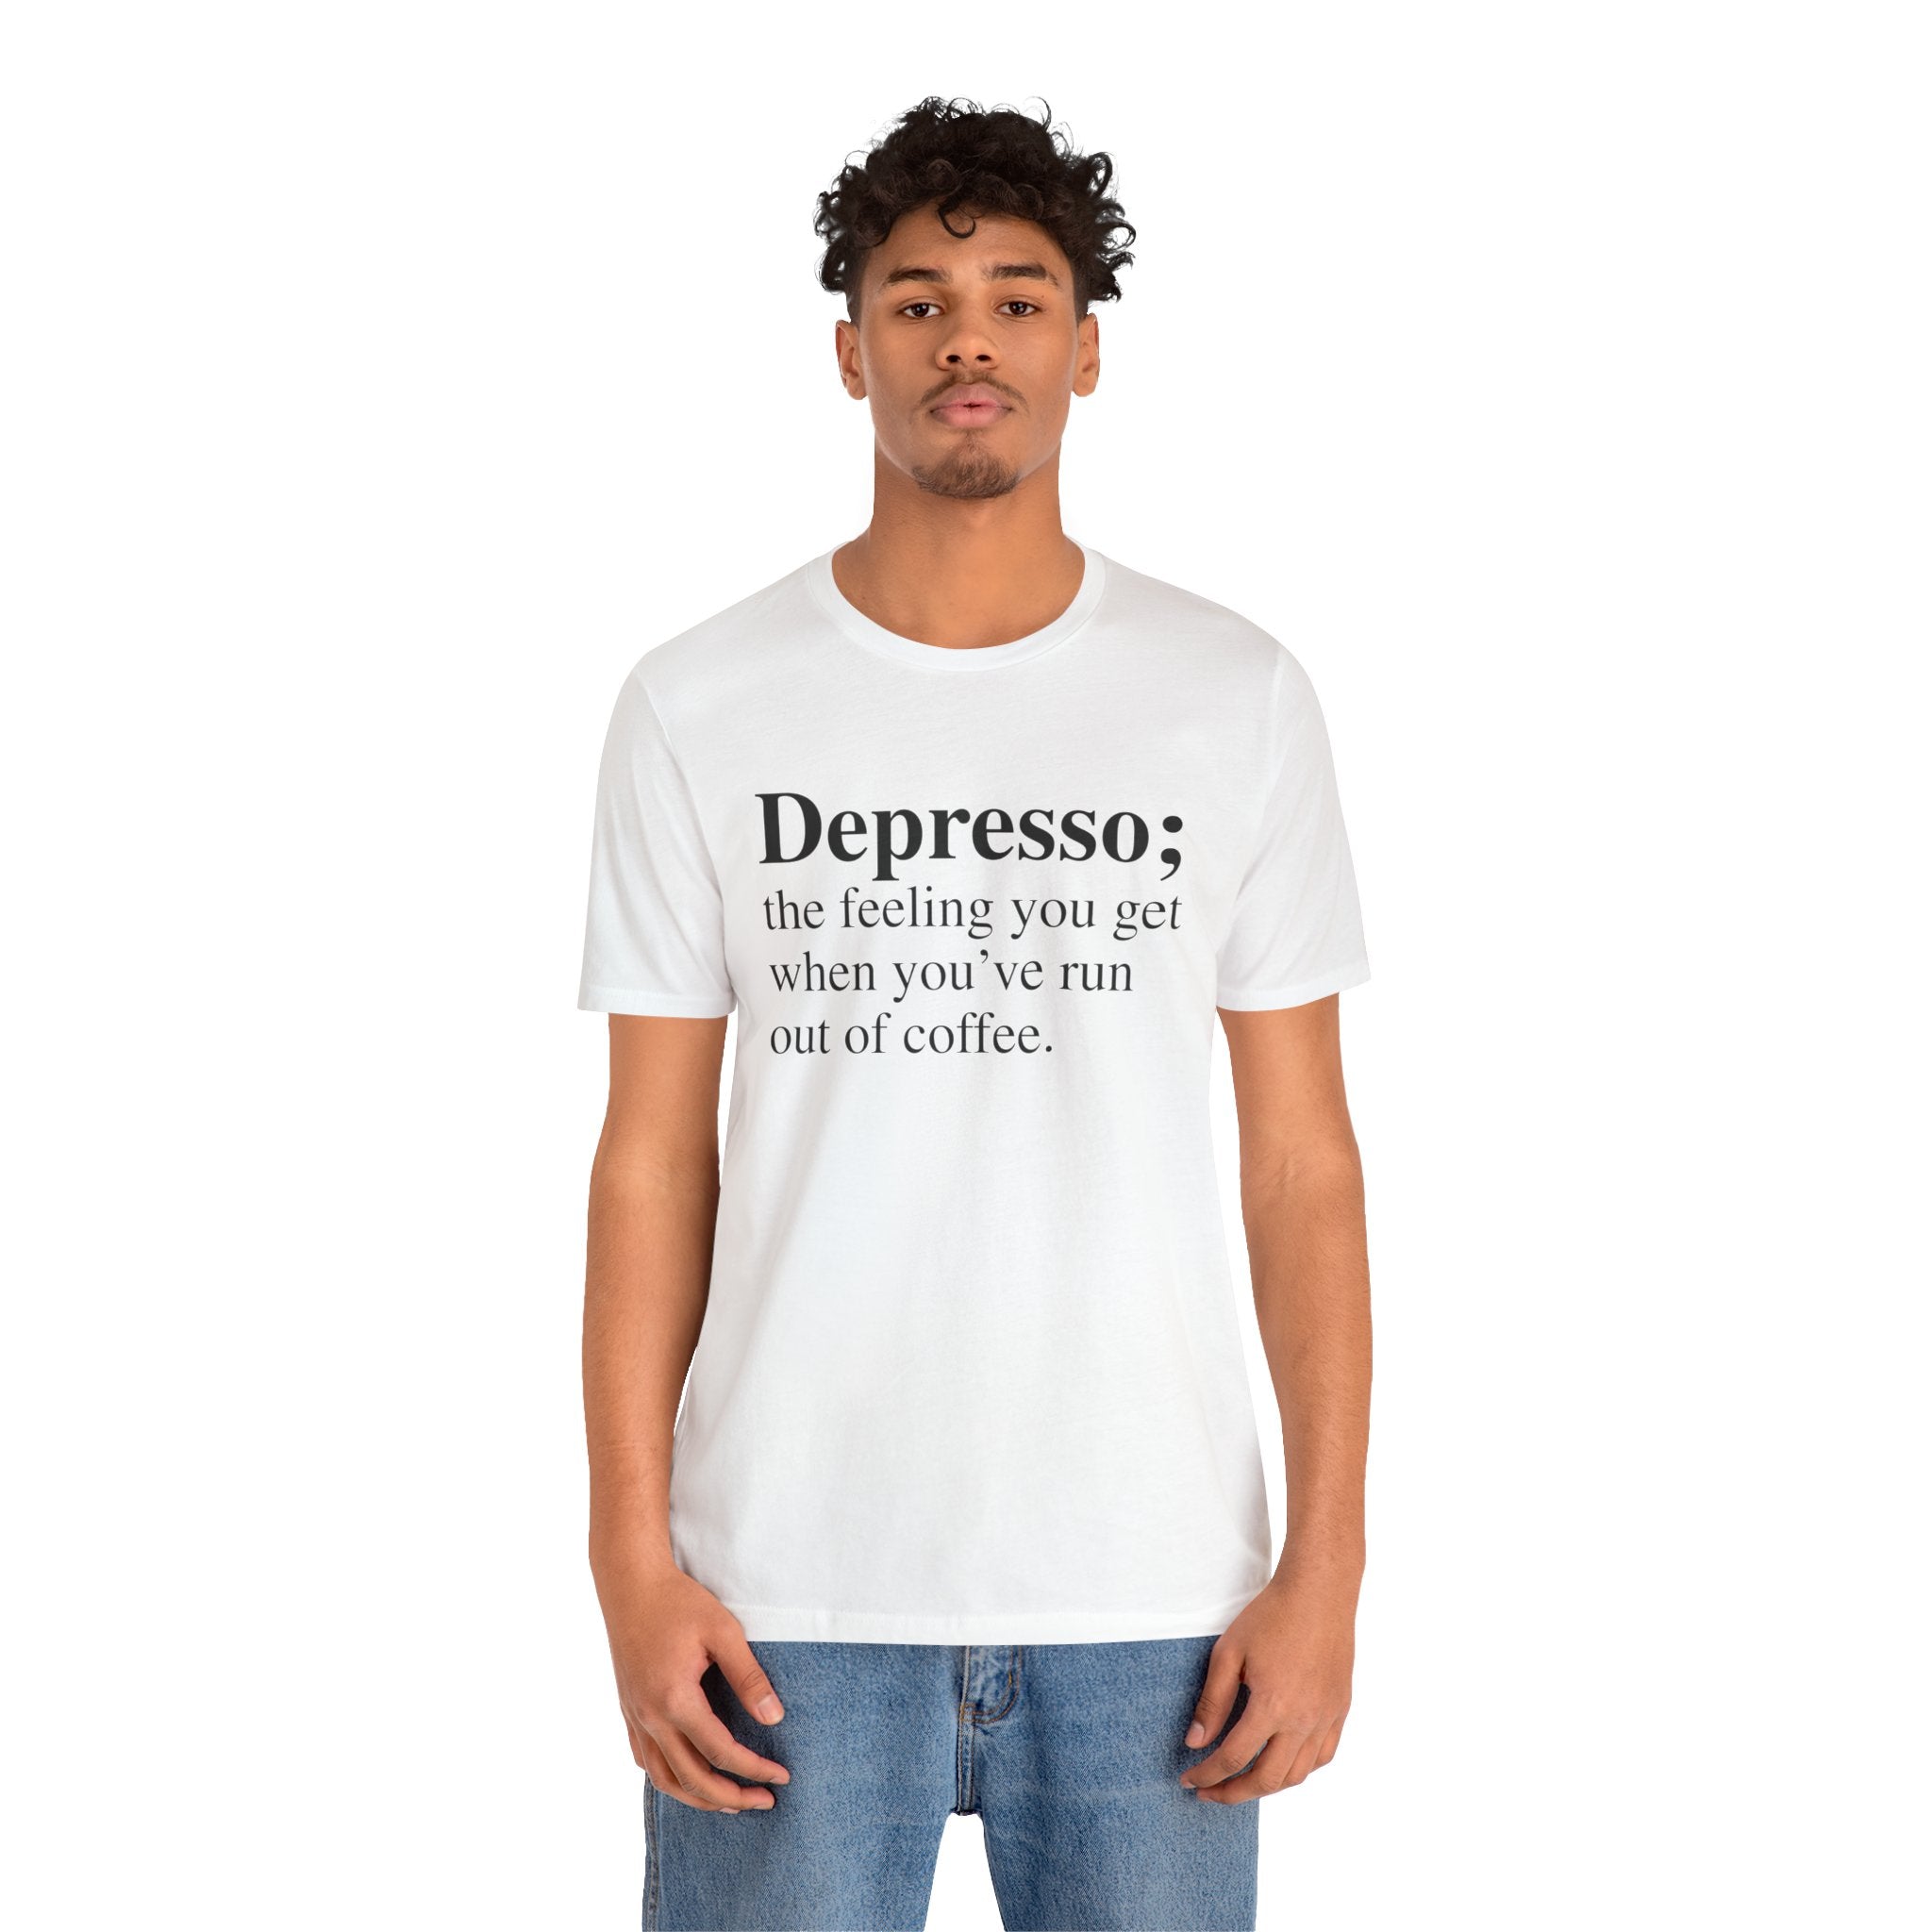 A young man wearing a soft cotton Depresso T-Shirt, with the text "depresso; the feeling you get when you've run out of coffee," stands against a plain background.